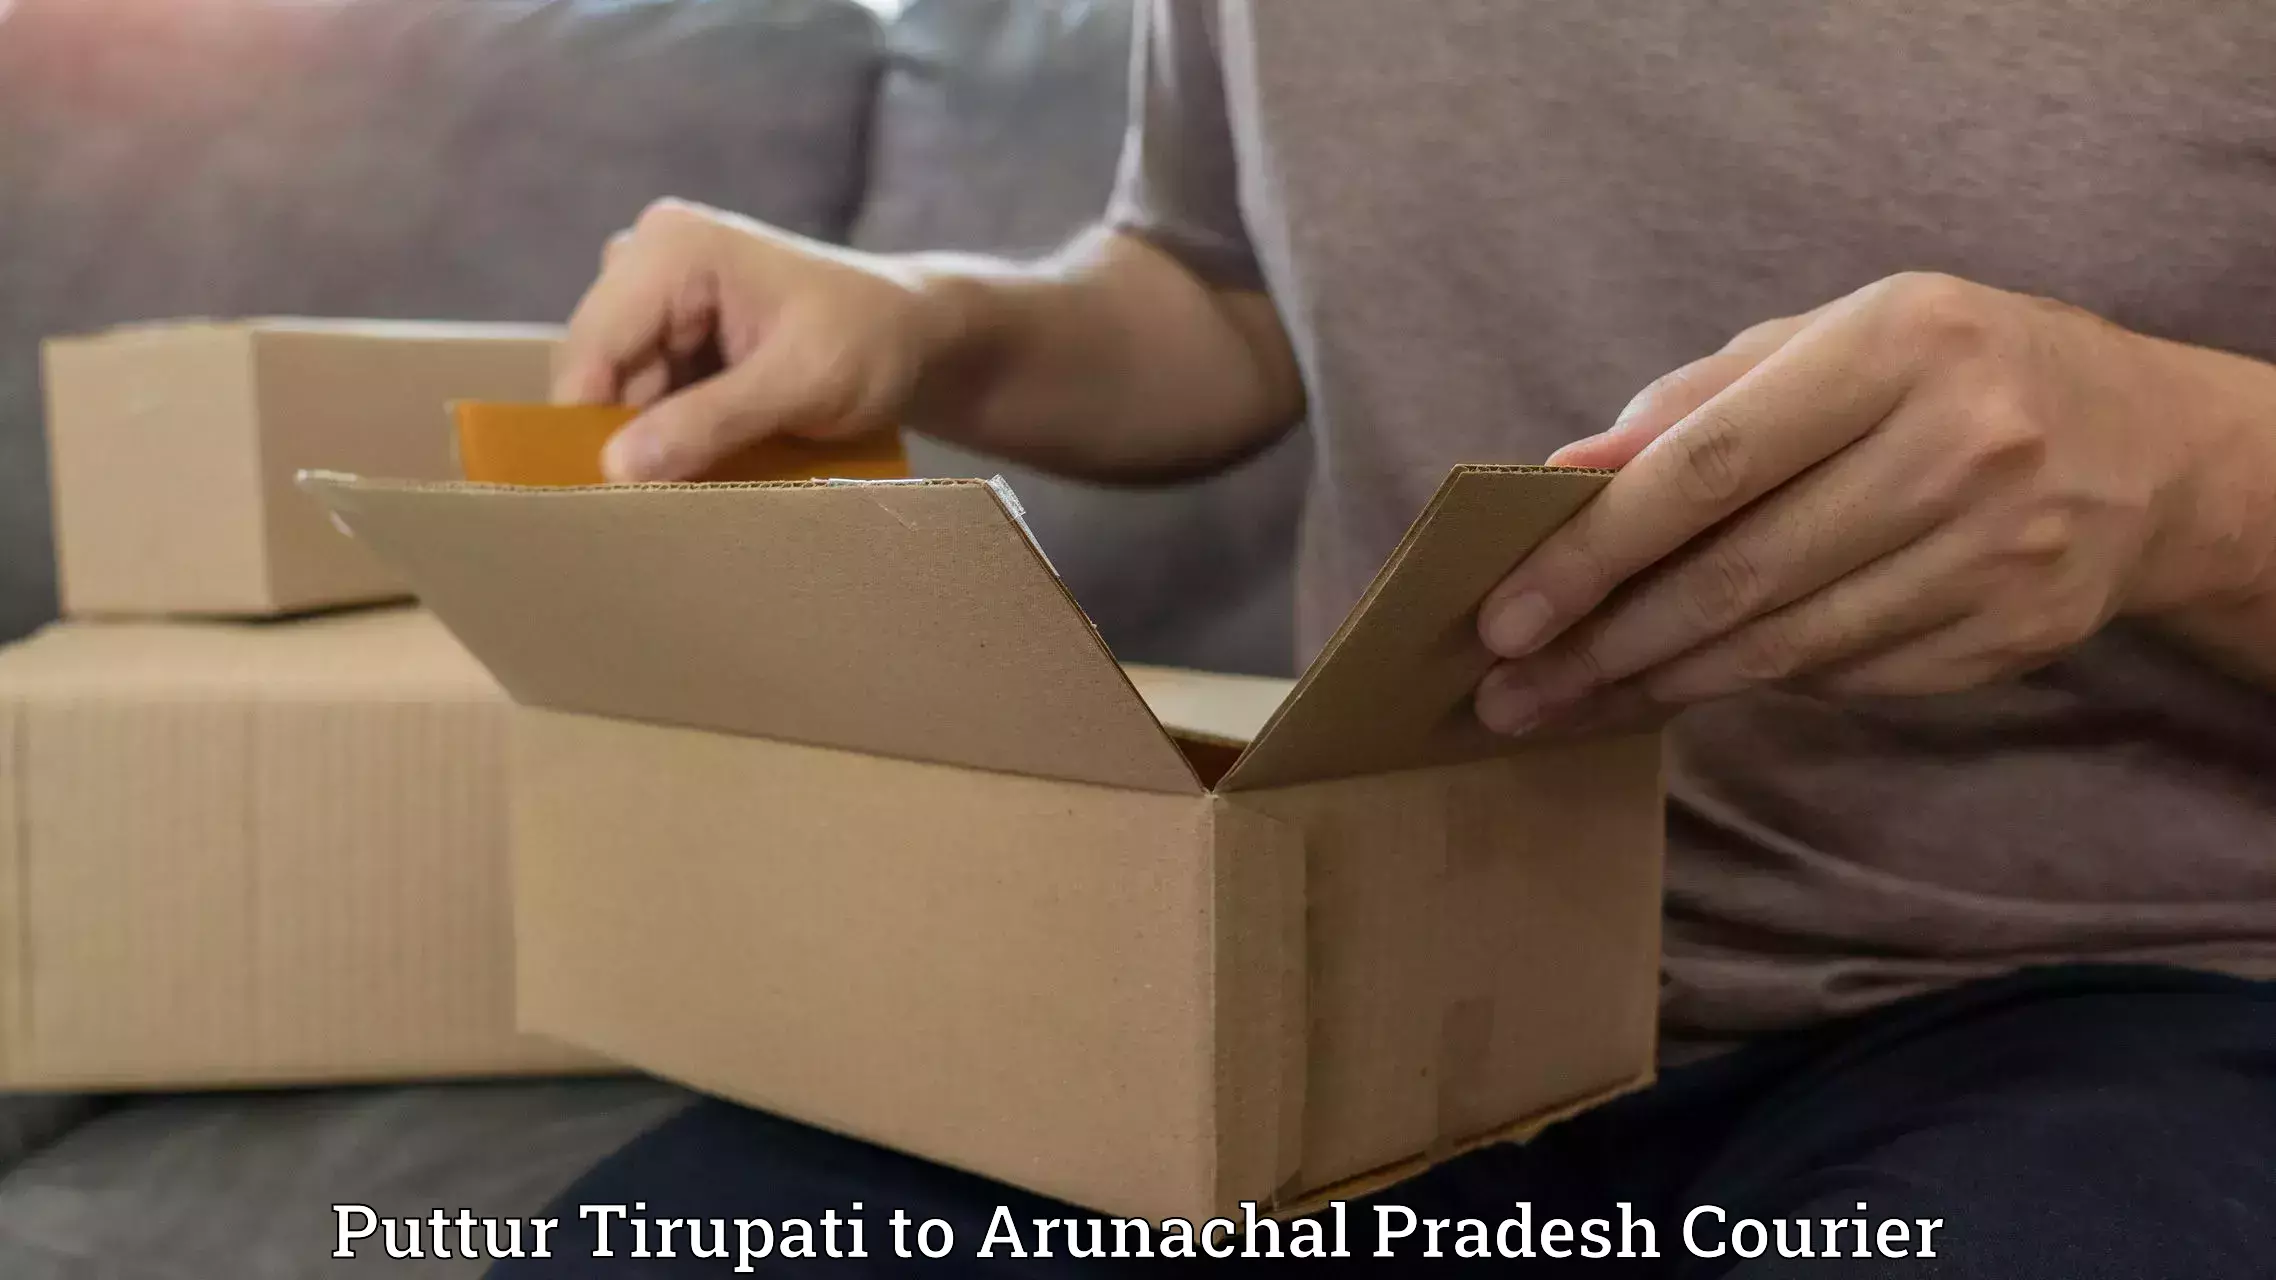 Sustainable courier practices Puttur Tirupati to Aalo